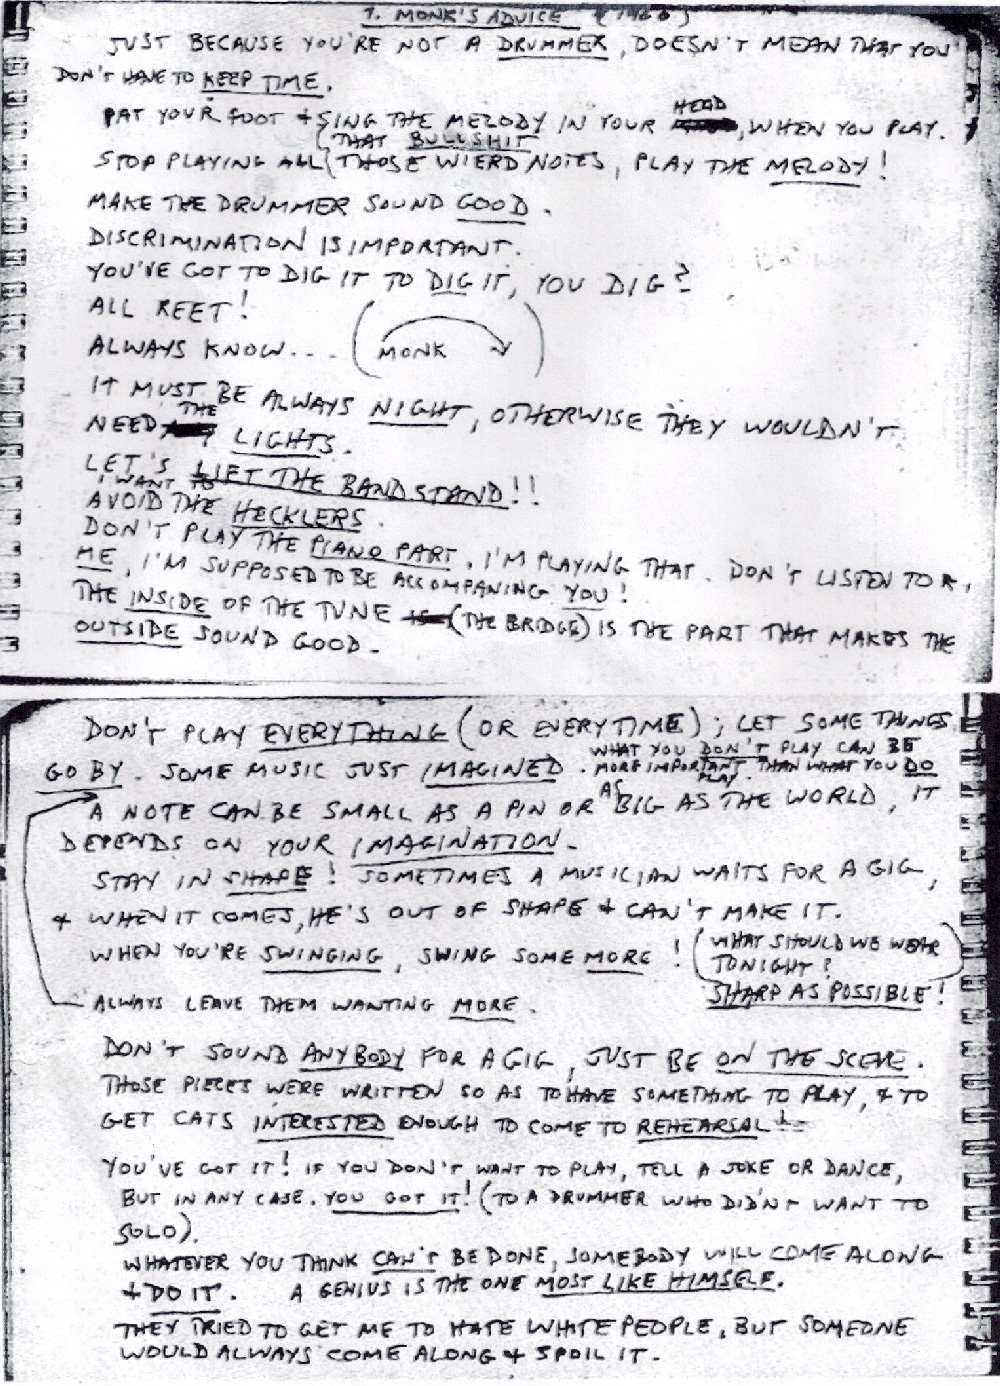 Advice from Thelonious Monk